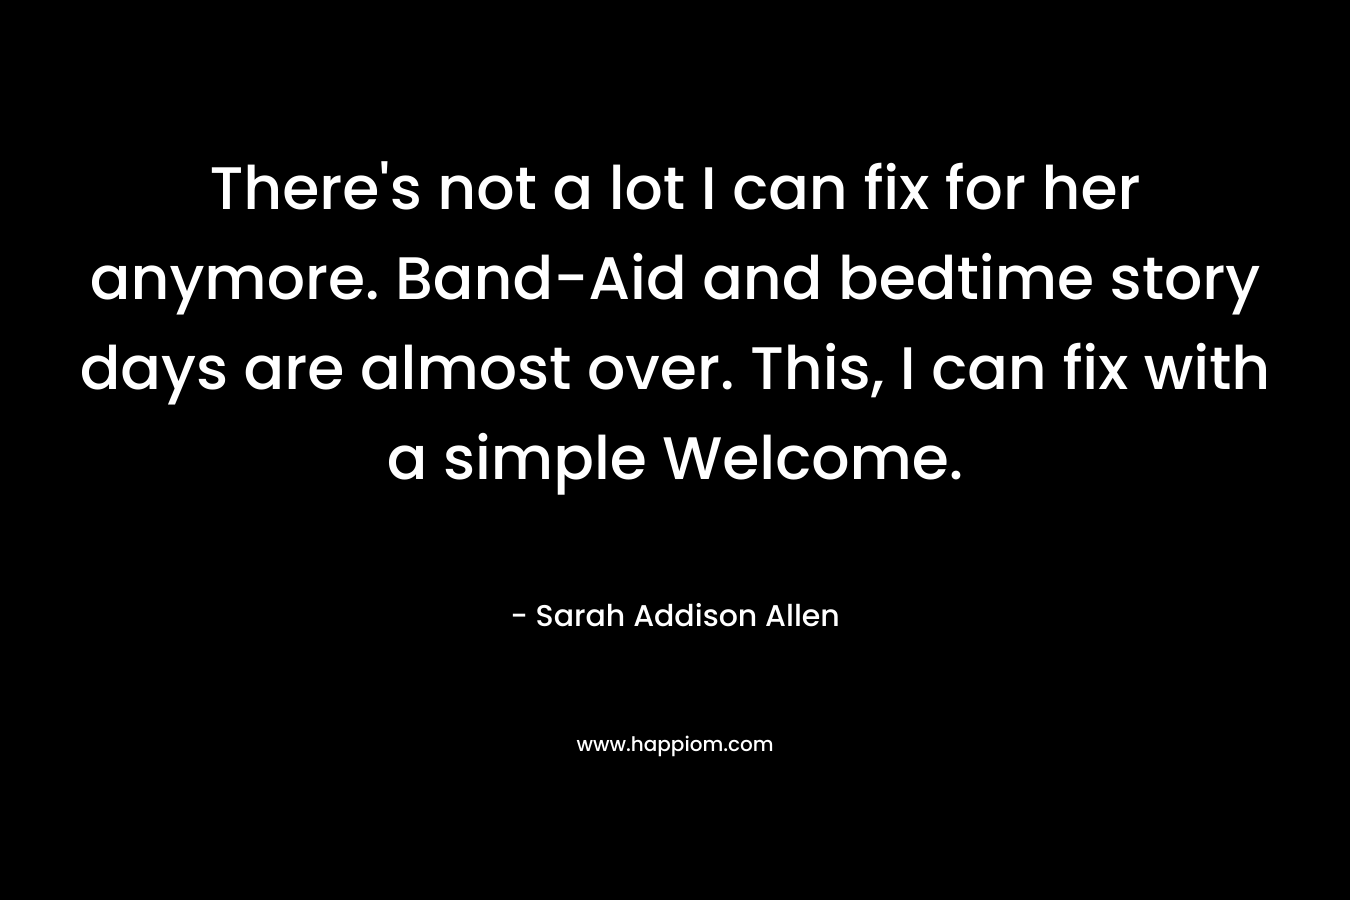 There’s not a lot I can fix for her anymore. Band-Aid and bedtime story days are almost over. This, I can fix with a simple Welcome. – Sarah Addison Allen